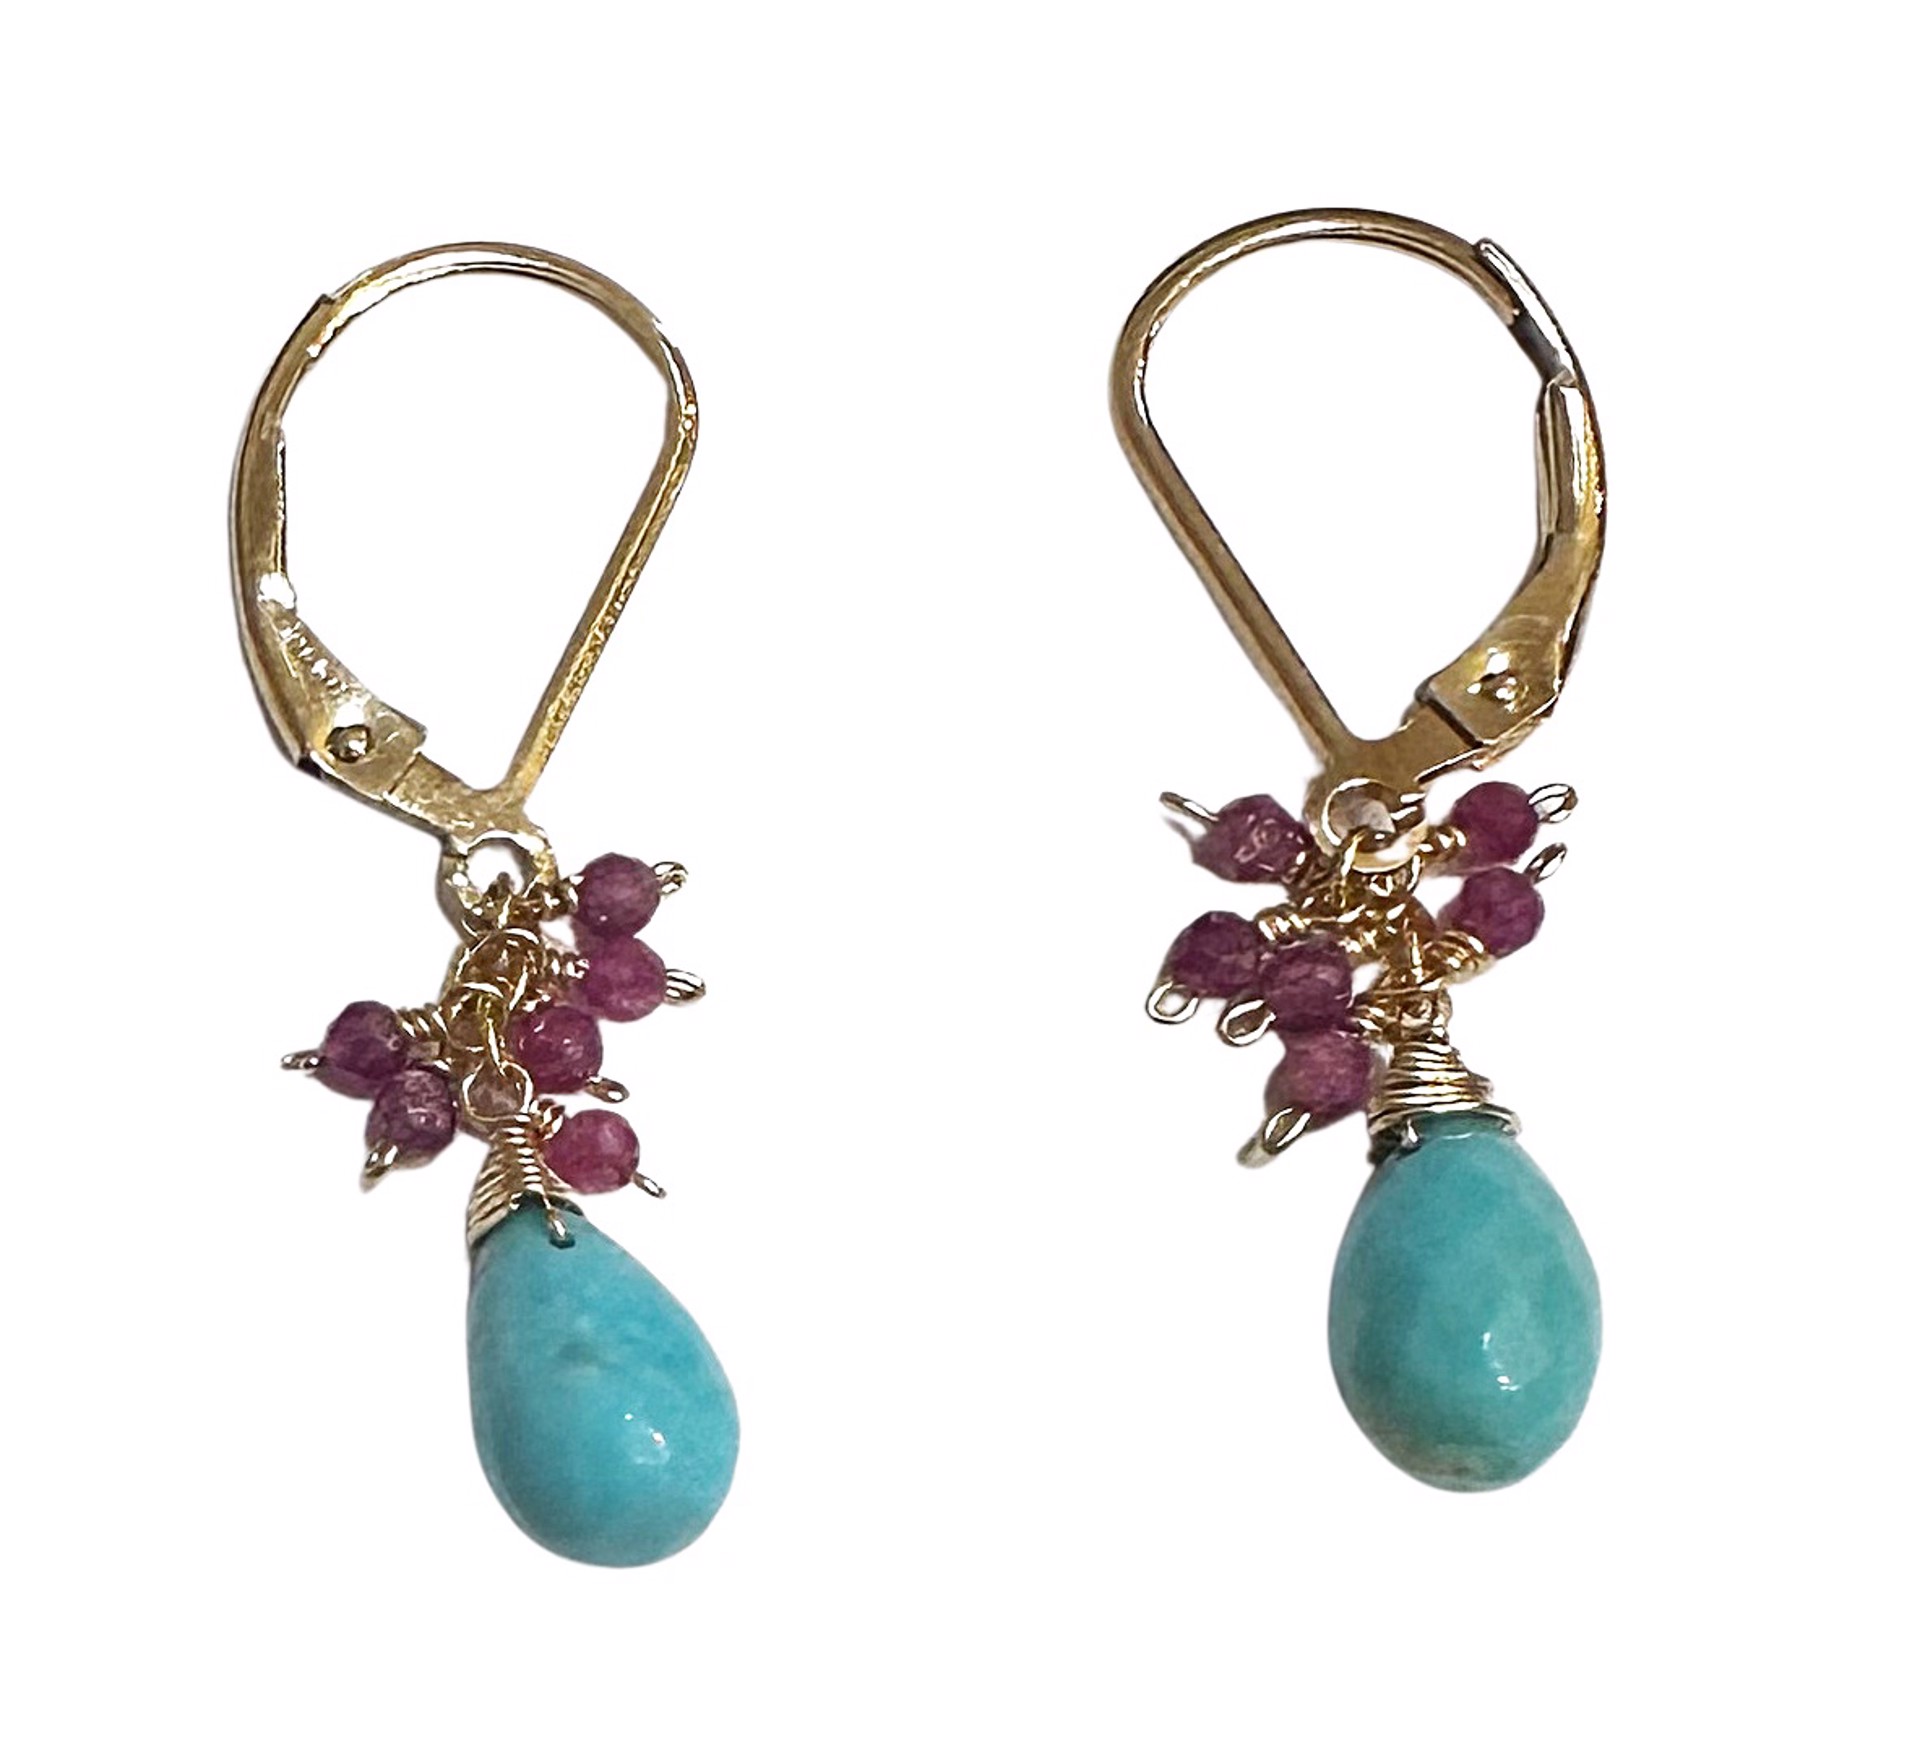 Earrings - 14K Gold with Ruby and Sleeping Beauty Turquoise Drops by Julia Balestracci